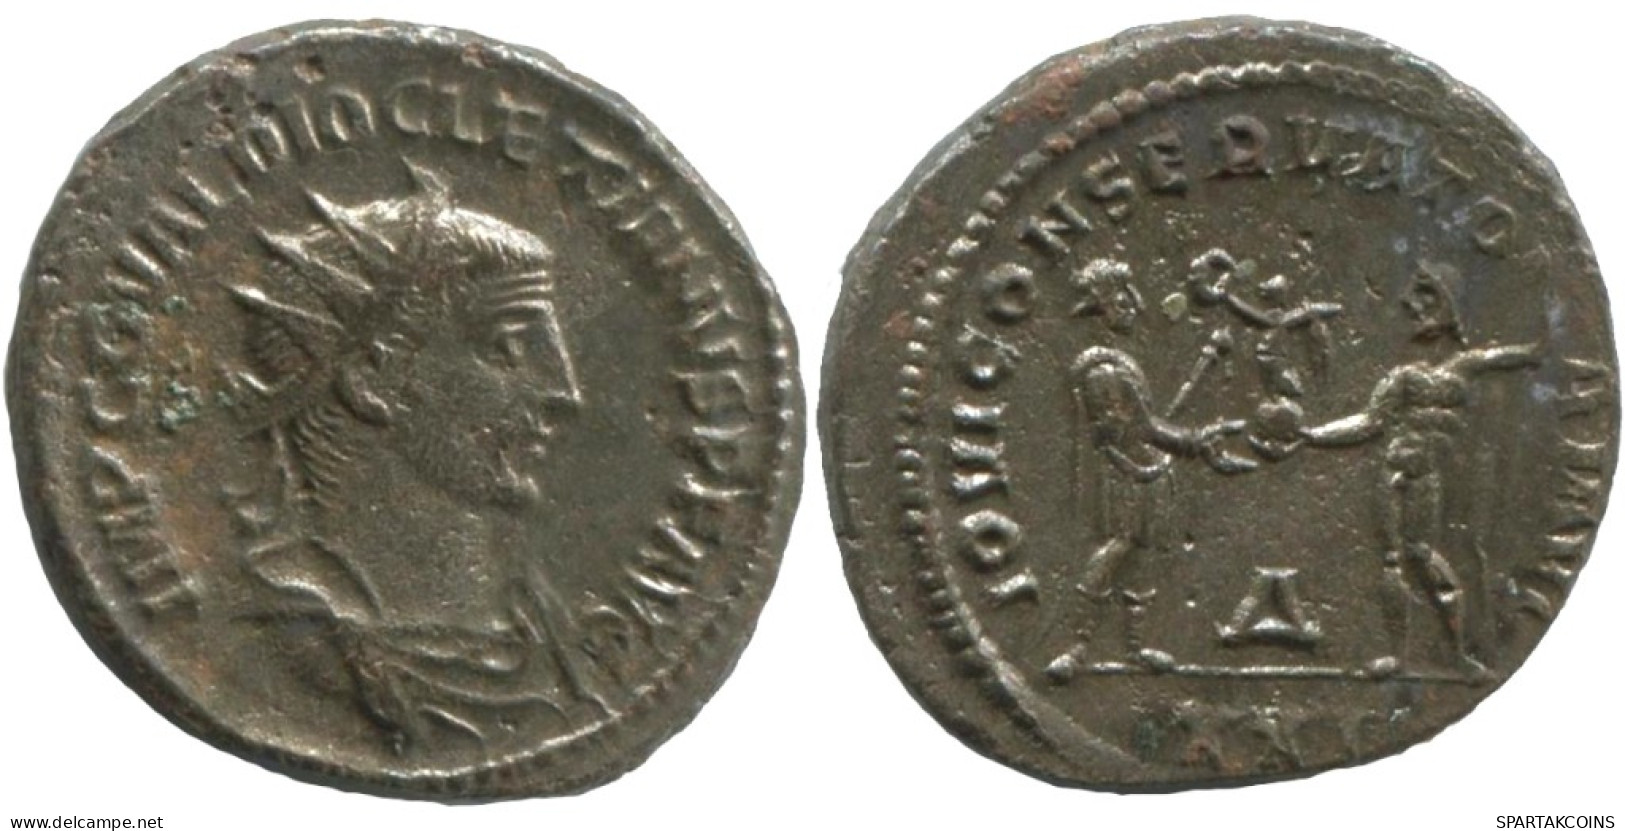 DIOCLETIAN ANTONINIANUS Antioch (?/XXI) AD287 IOVICONSERVATORI. #ANT1917.48.E.A - The Tetrarchy (284 AD Tot 307 AD)